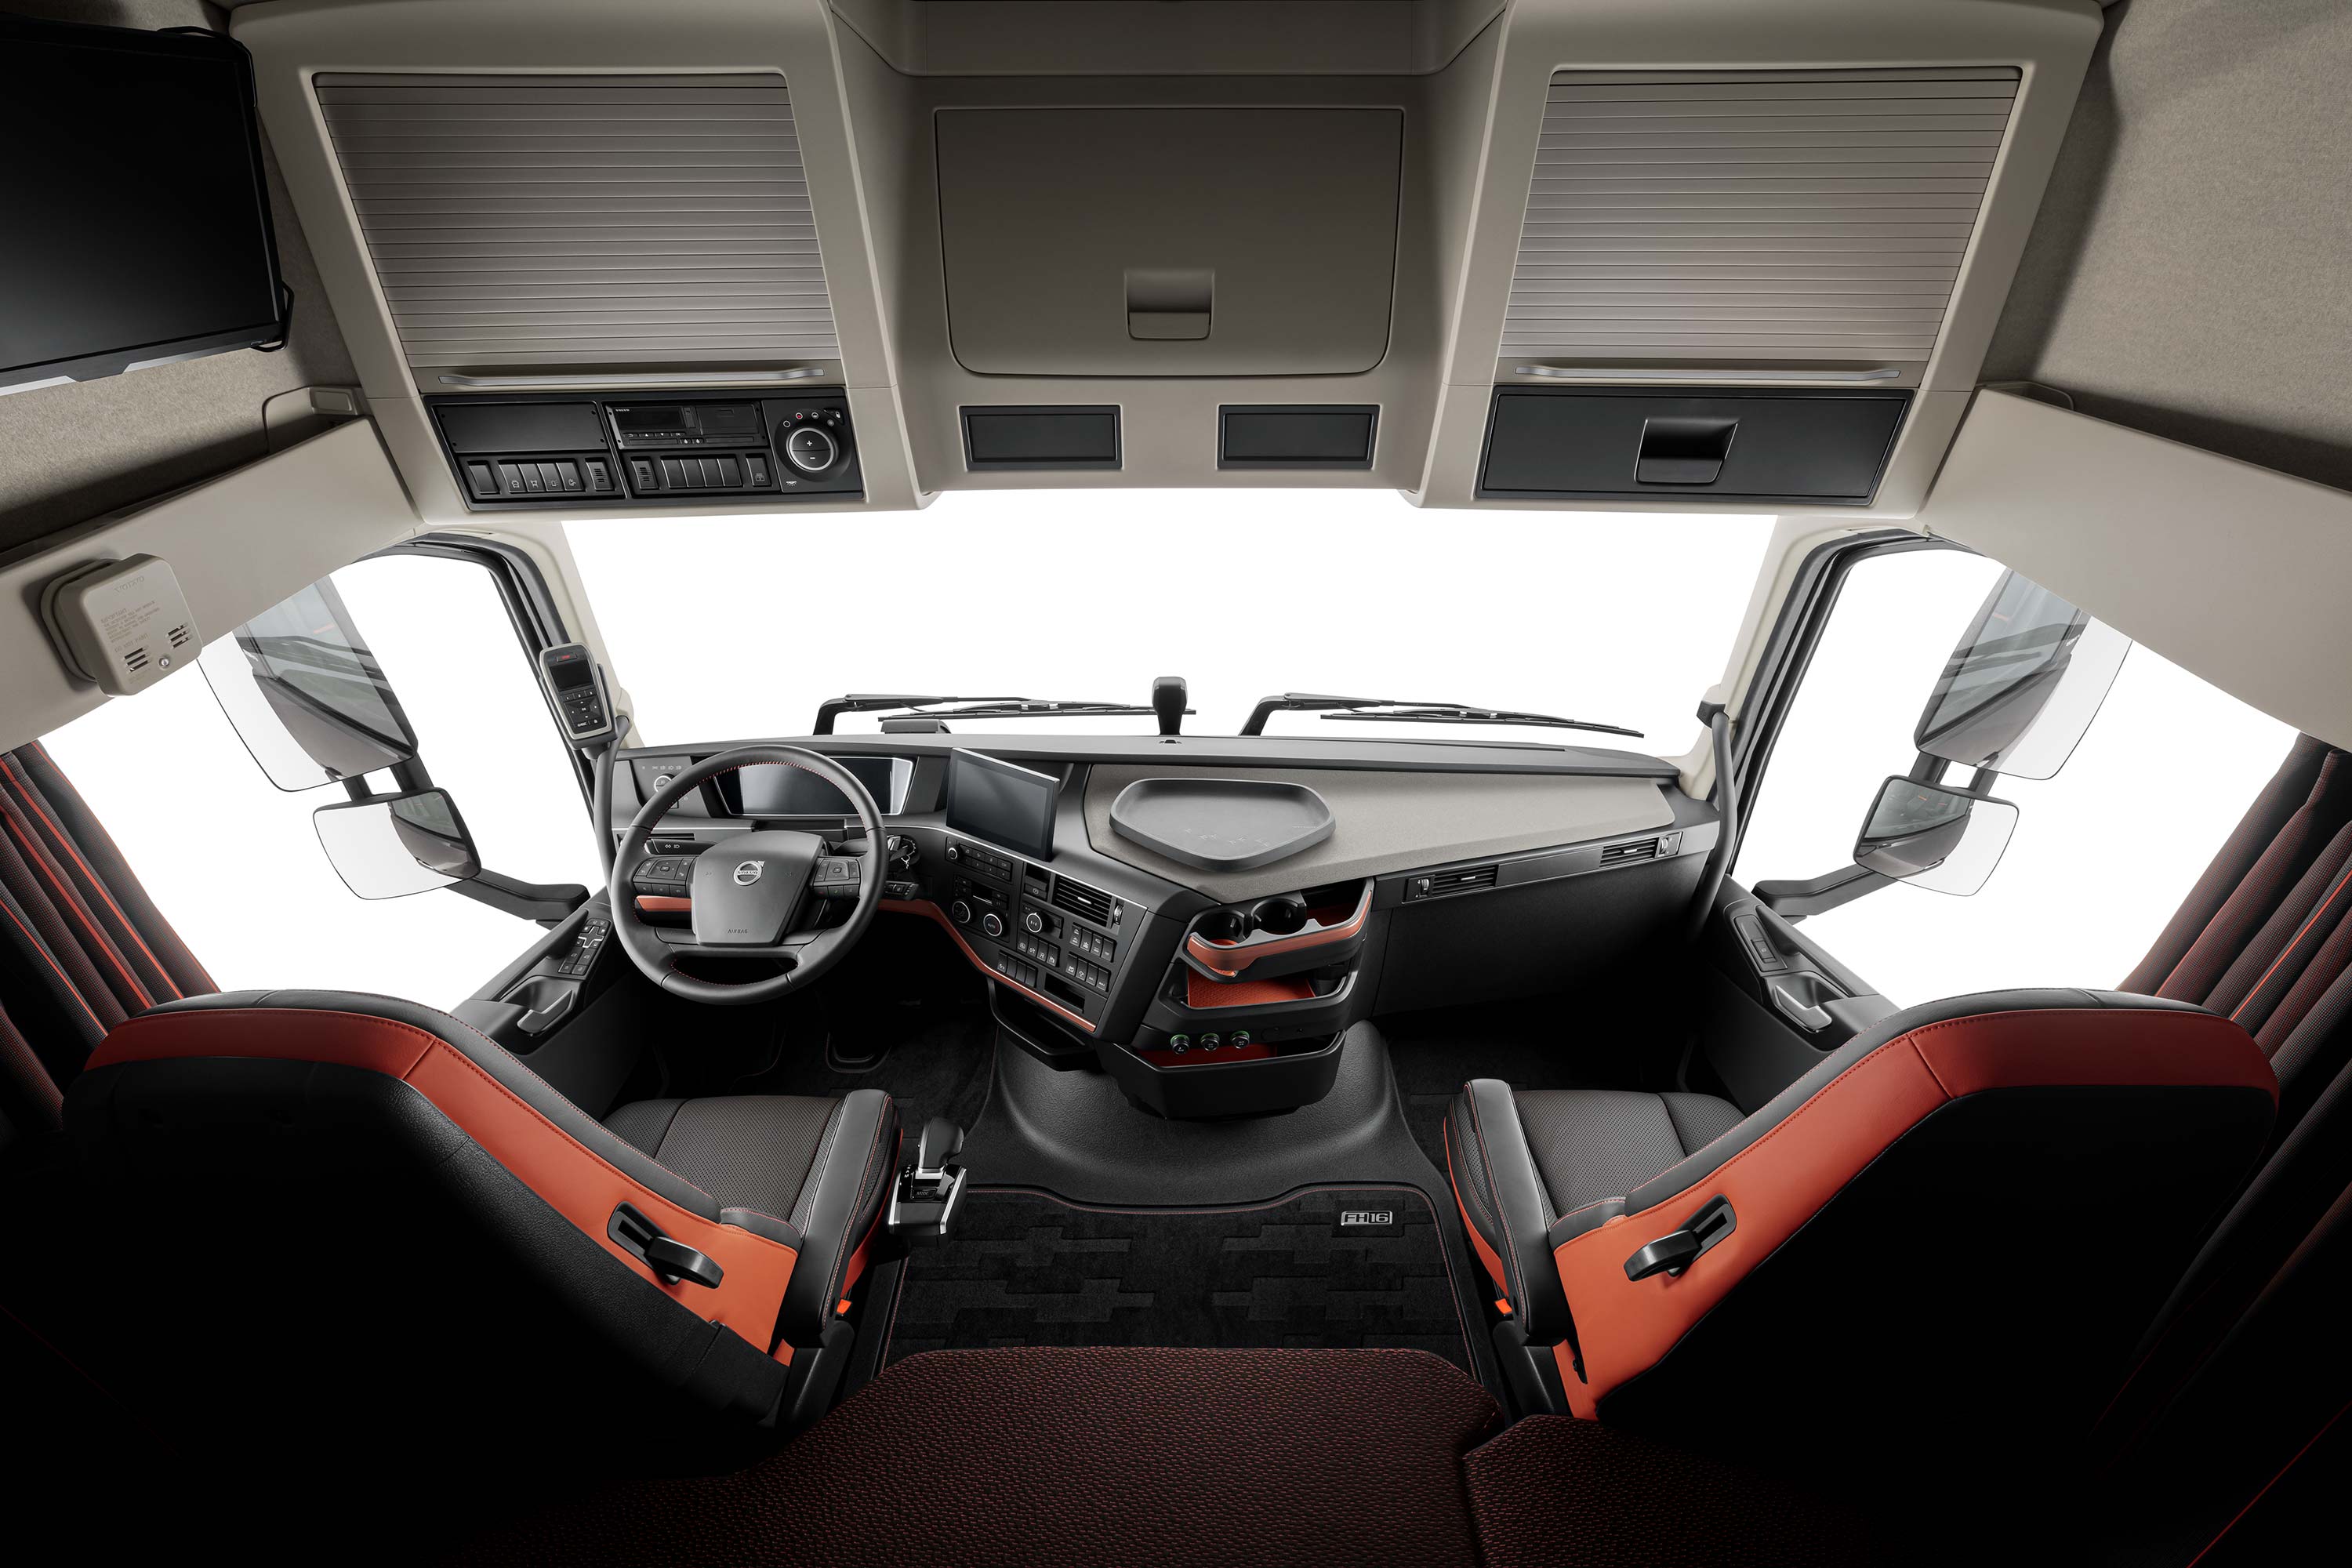 The Volvo FH16 offer a unique look and plenty of space.